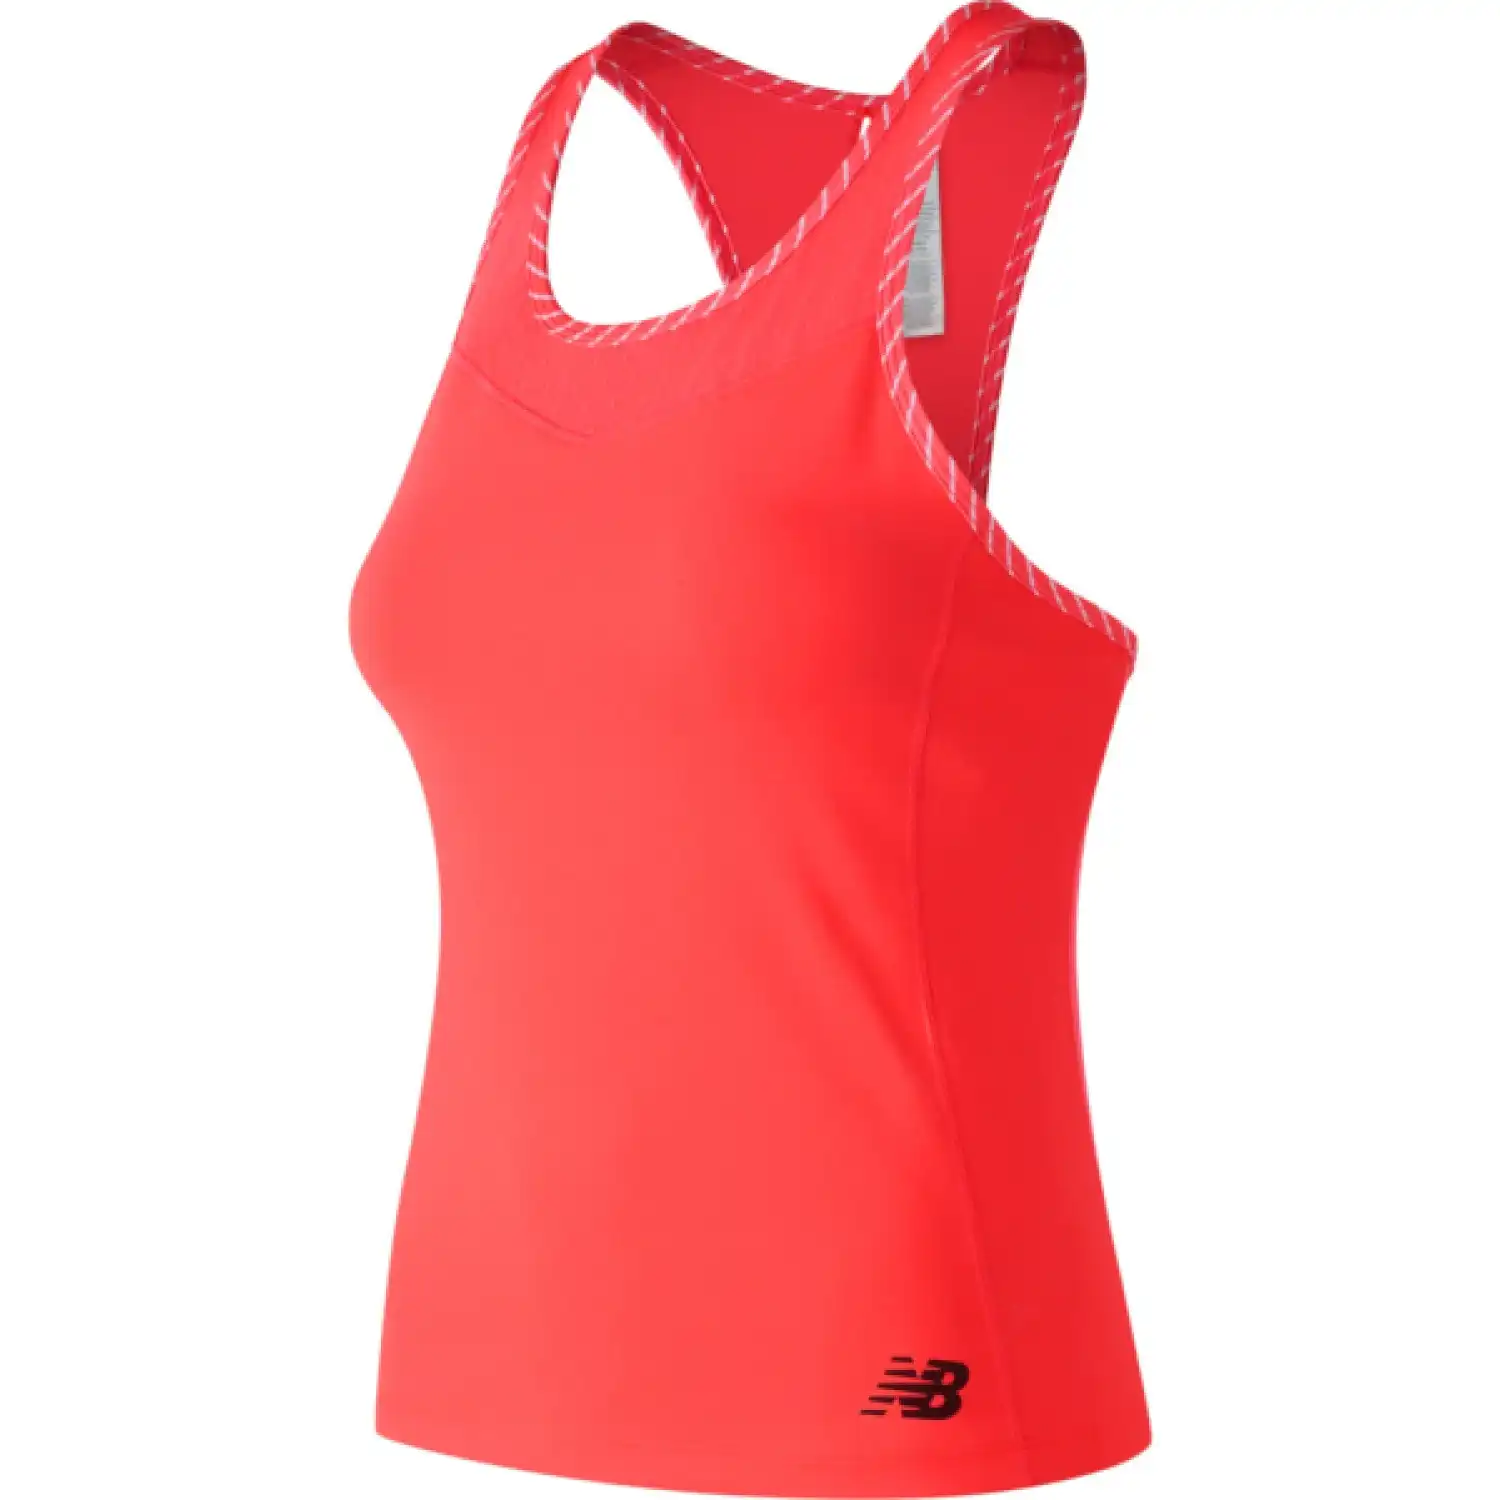 New Balance Women's Tournament Racerback Tank Top Fitted Tennis Sport  - Coral